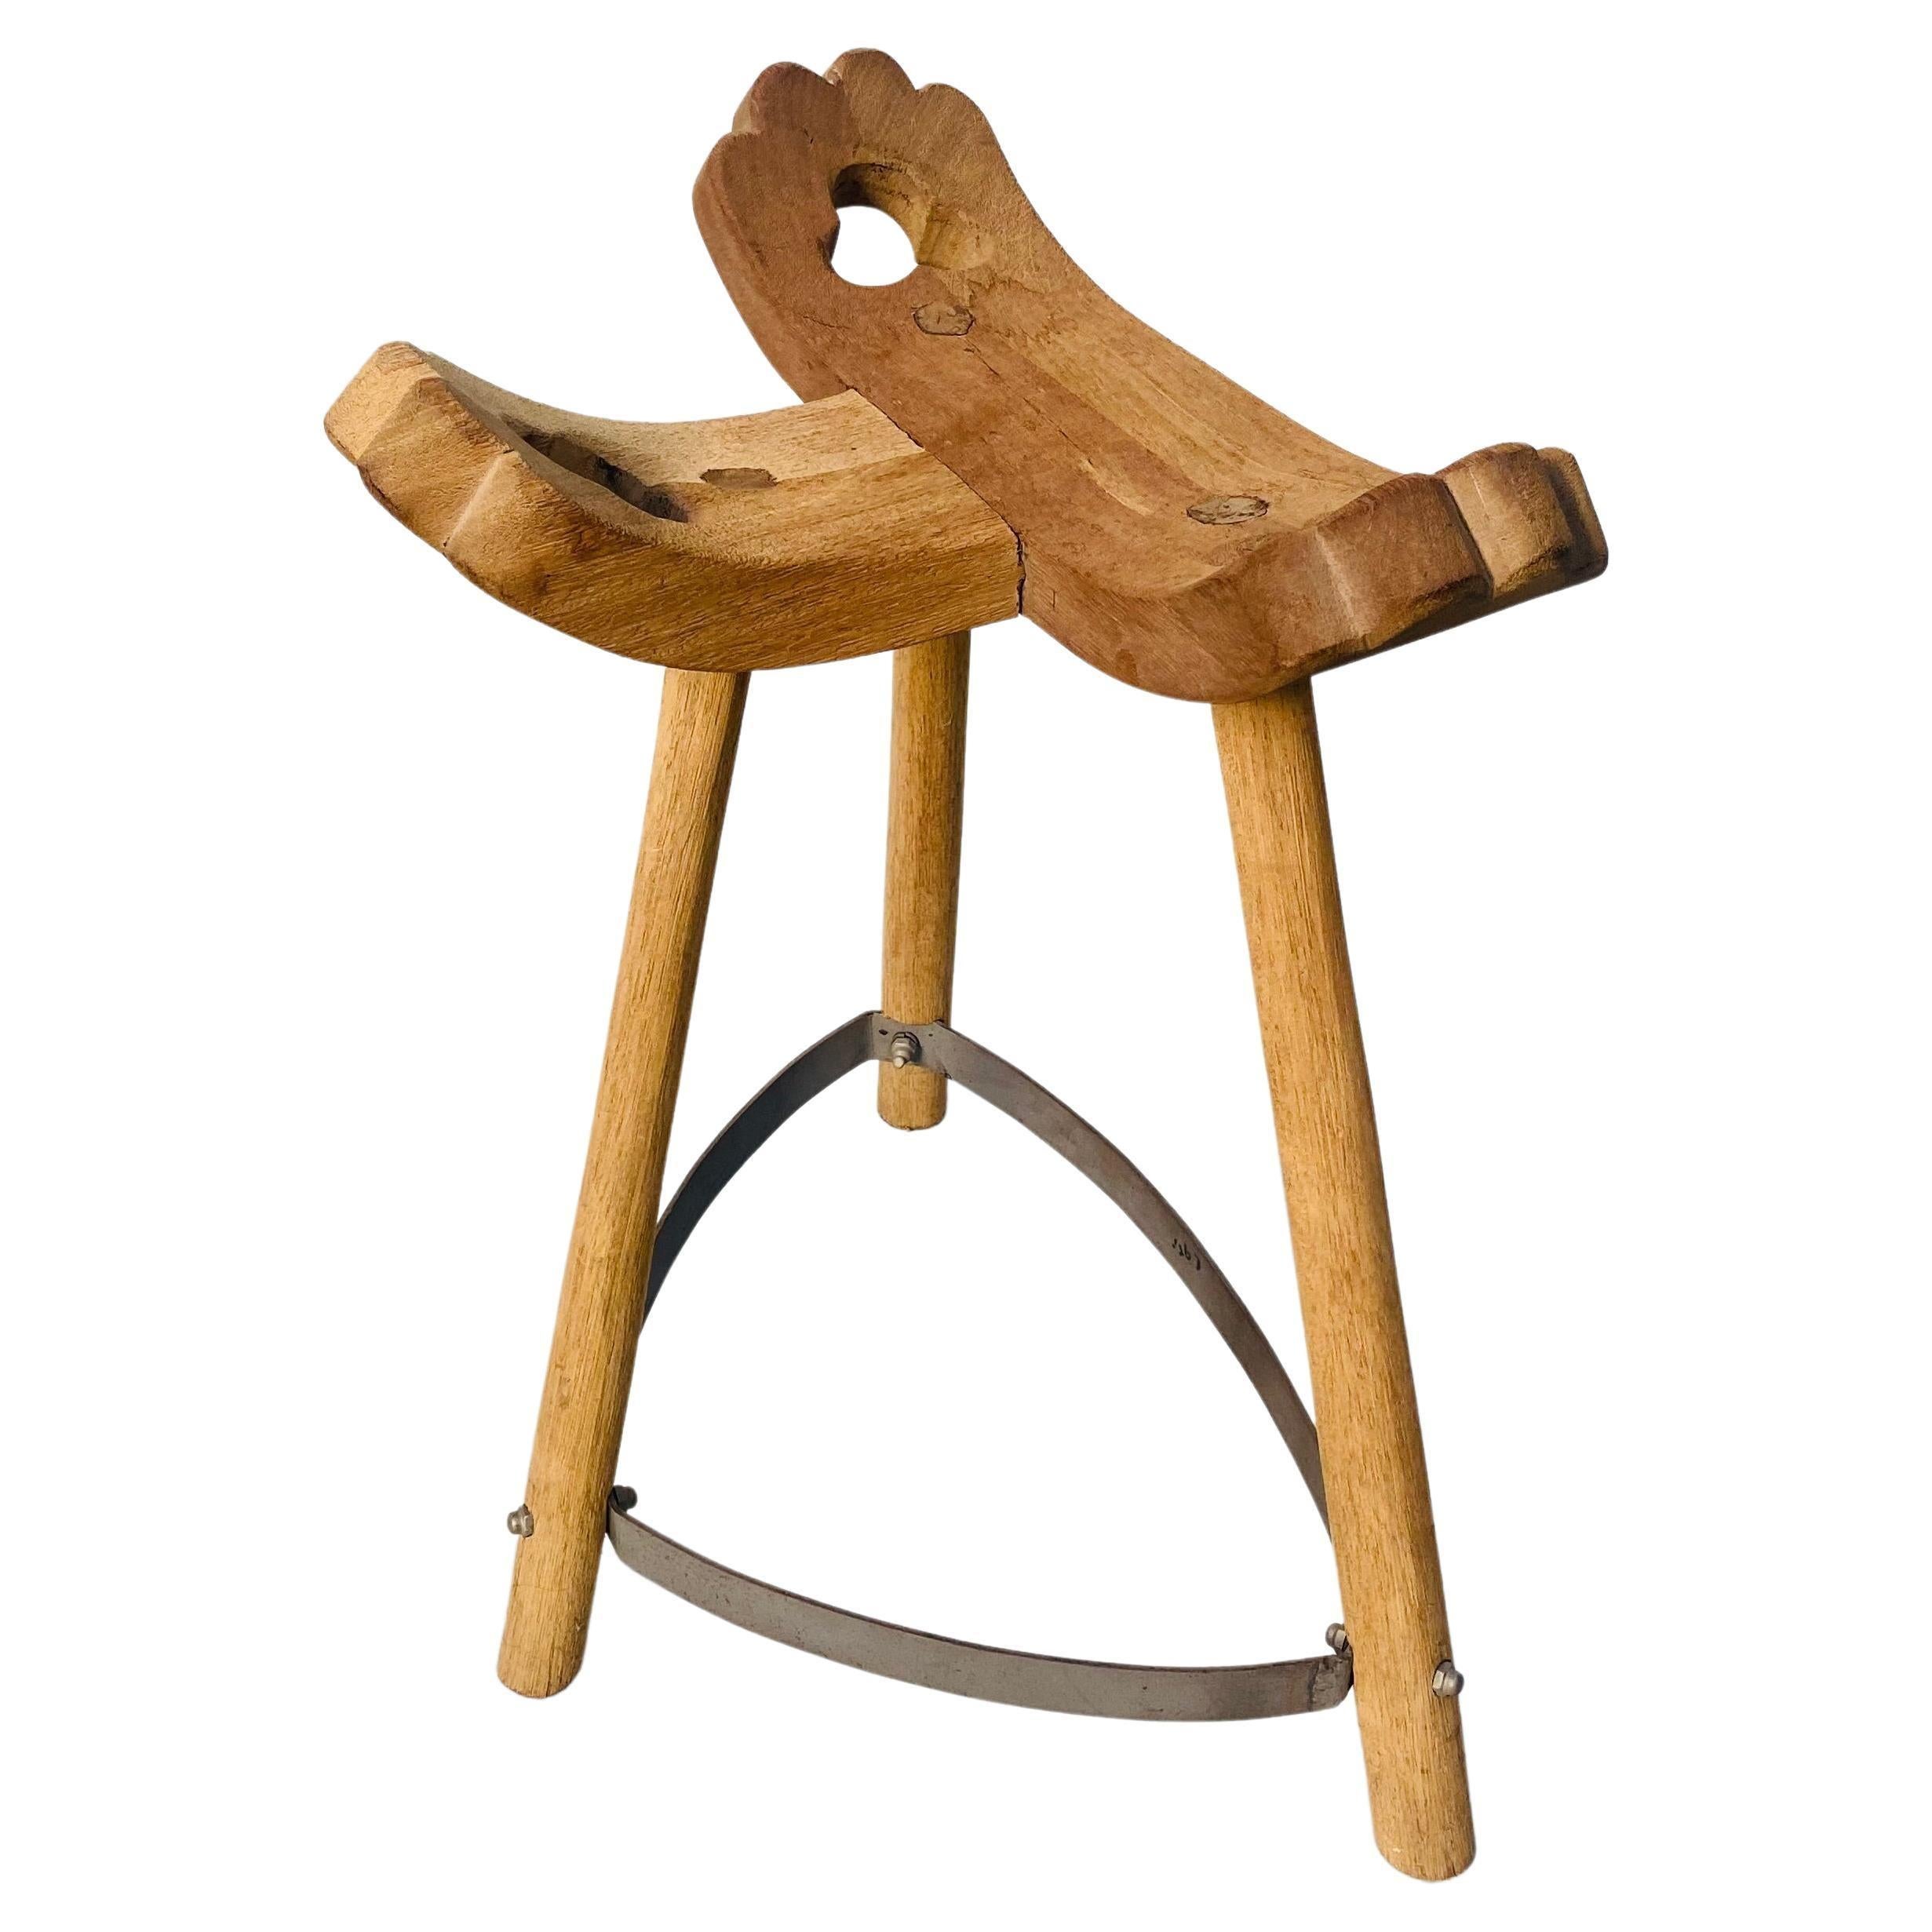 This Spanish handmade Brutalist style stool is made of oak wood and features also a iron footrest. The chair is sandblasted so the natural color of the oak has become visible again. Designed and handmade in the seventies.